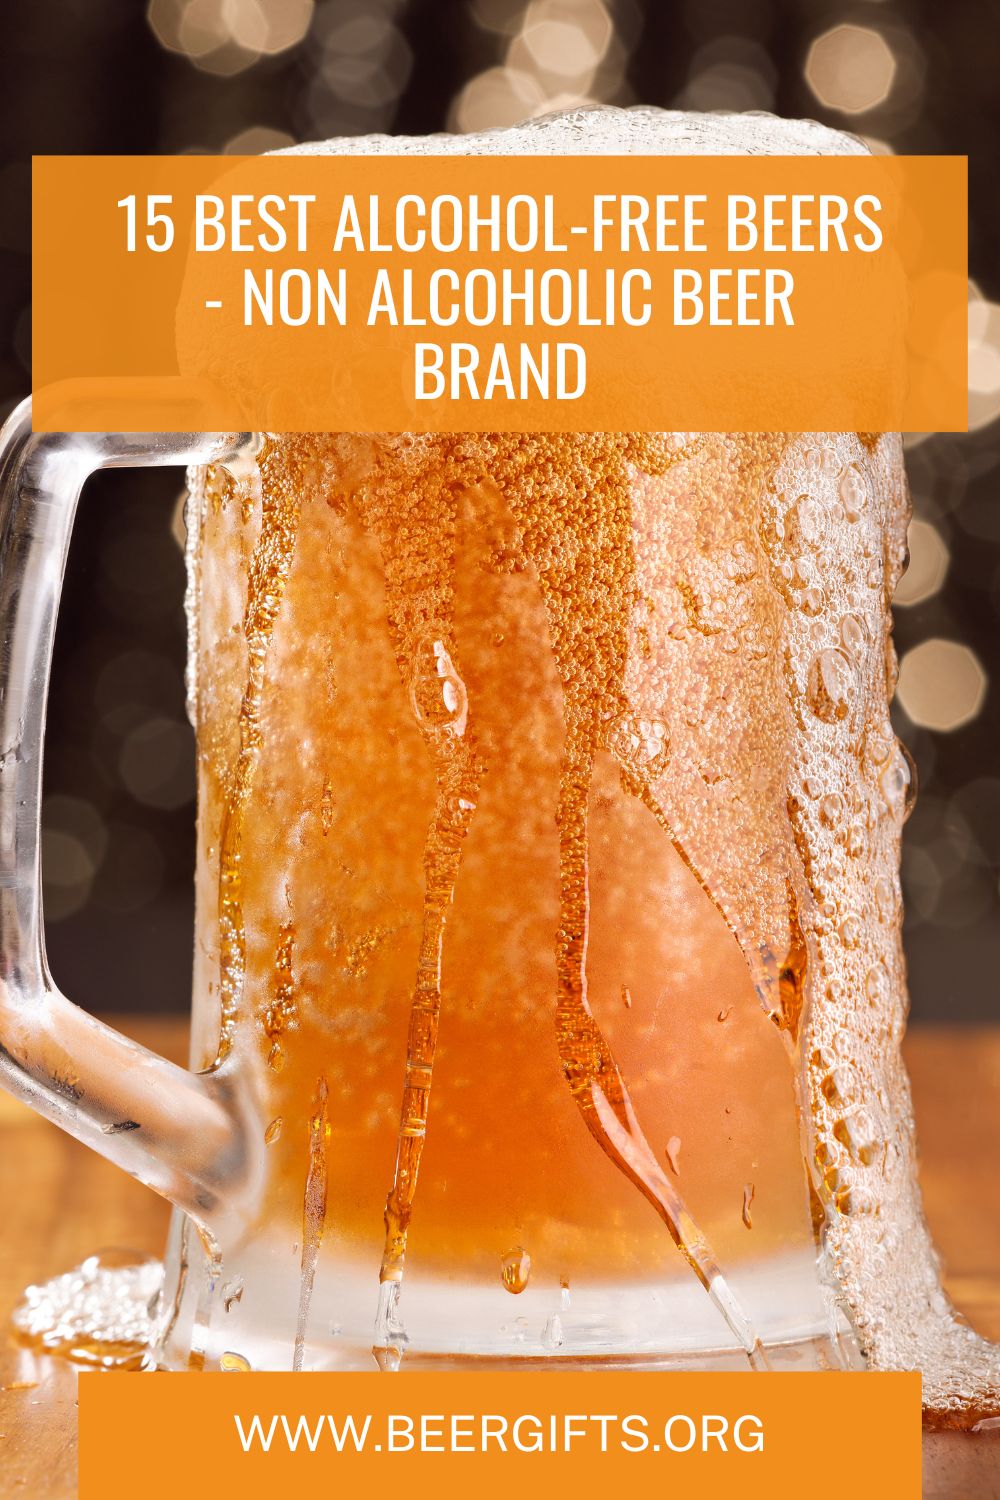 15 Best Alcohol-Free Beers - Non Alcoholic Beer Brand17